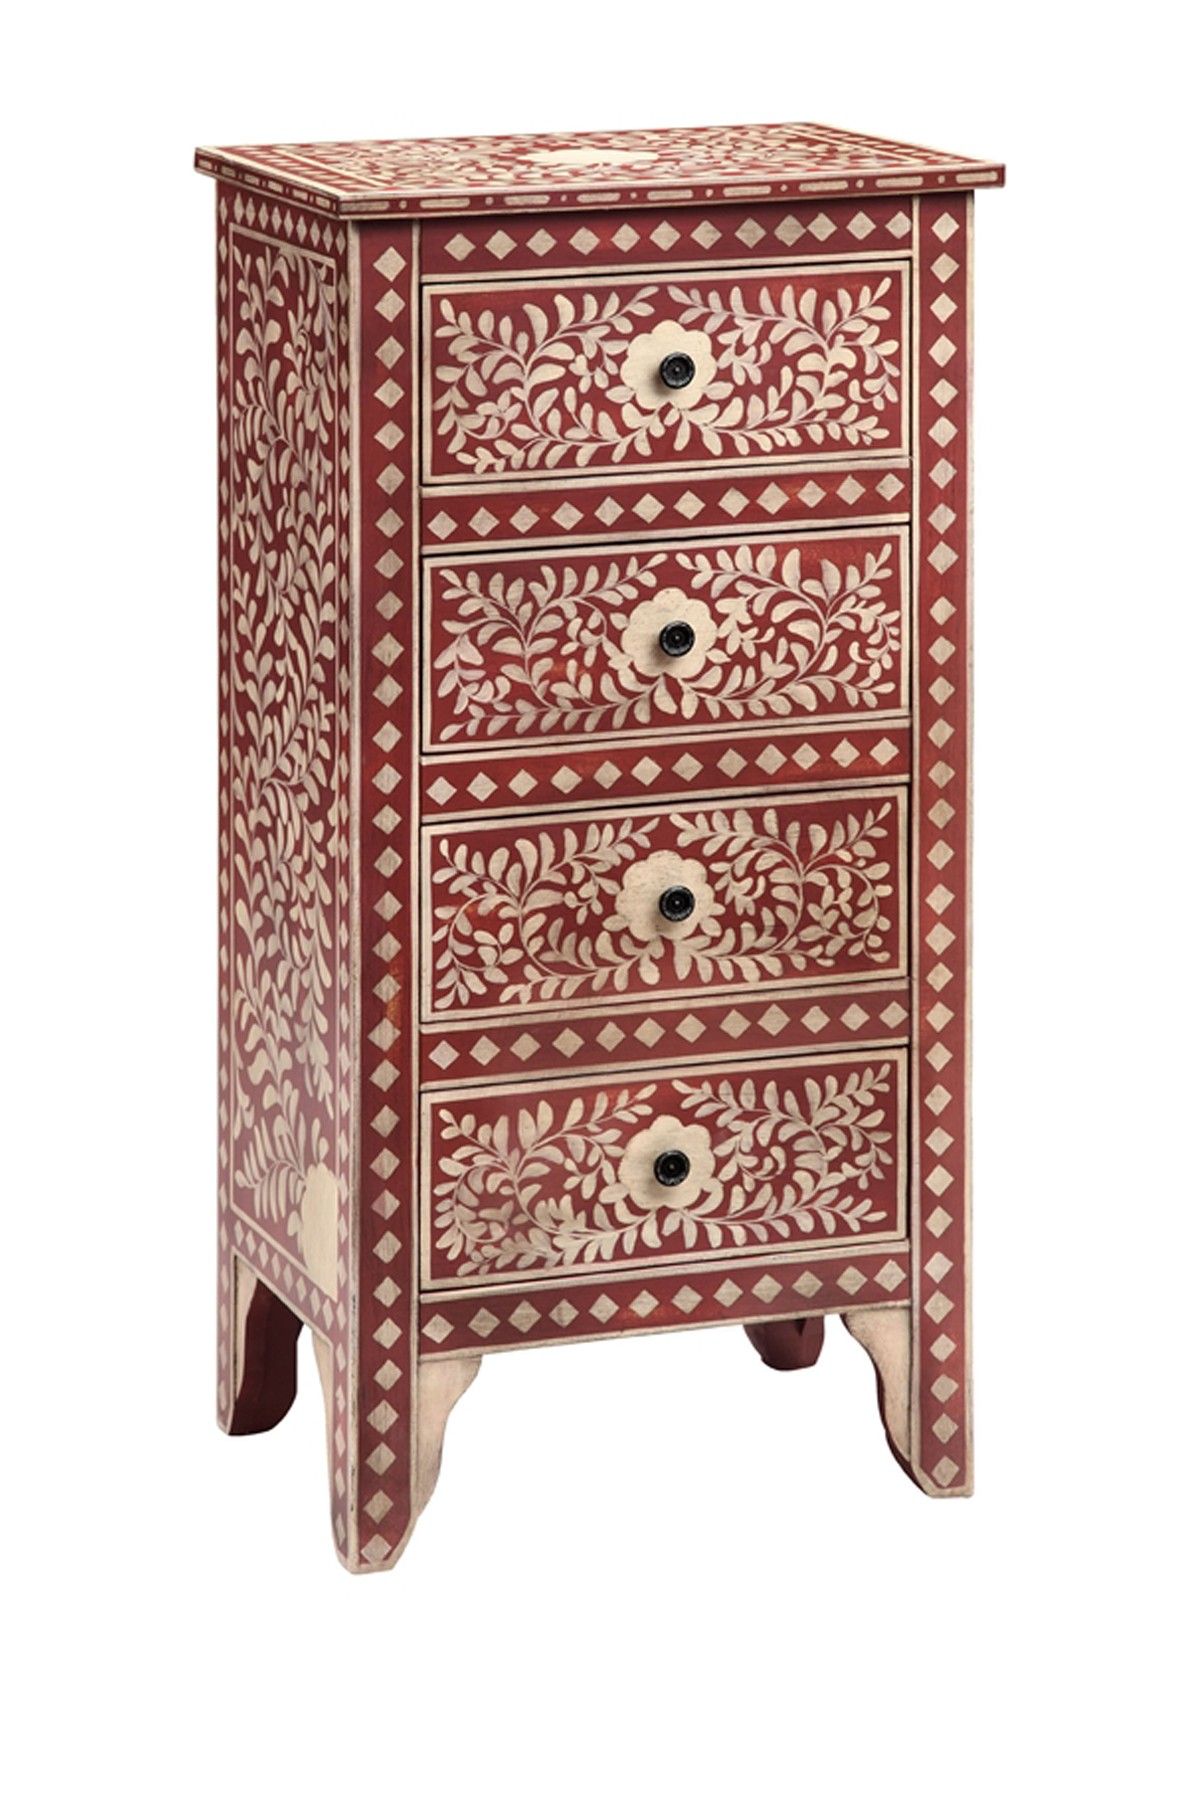 bijan hand painted drawer chest leen bakker woonideeen accent tables chests small wrought iron table bellingham furniture wood living room bent acrylic coffee distressed white